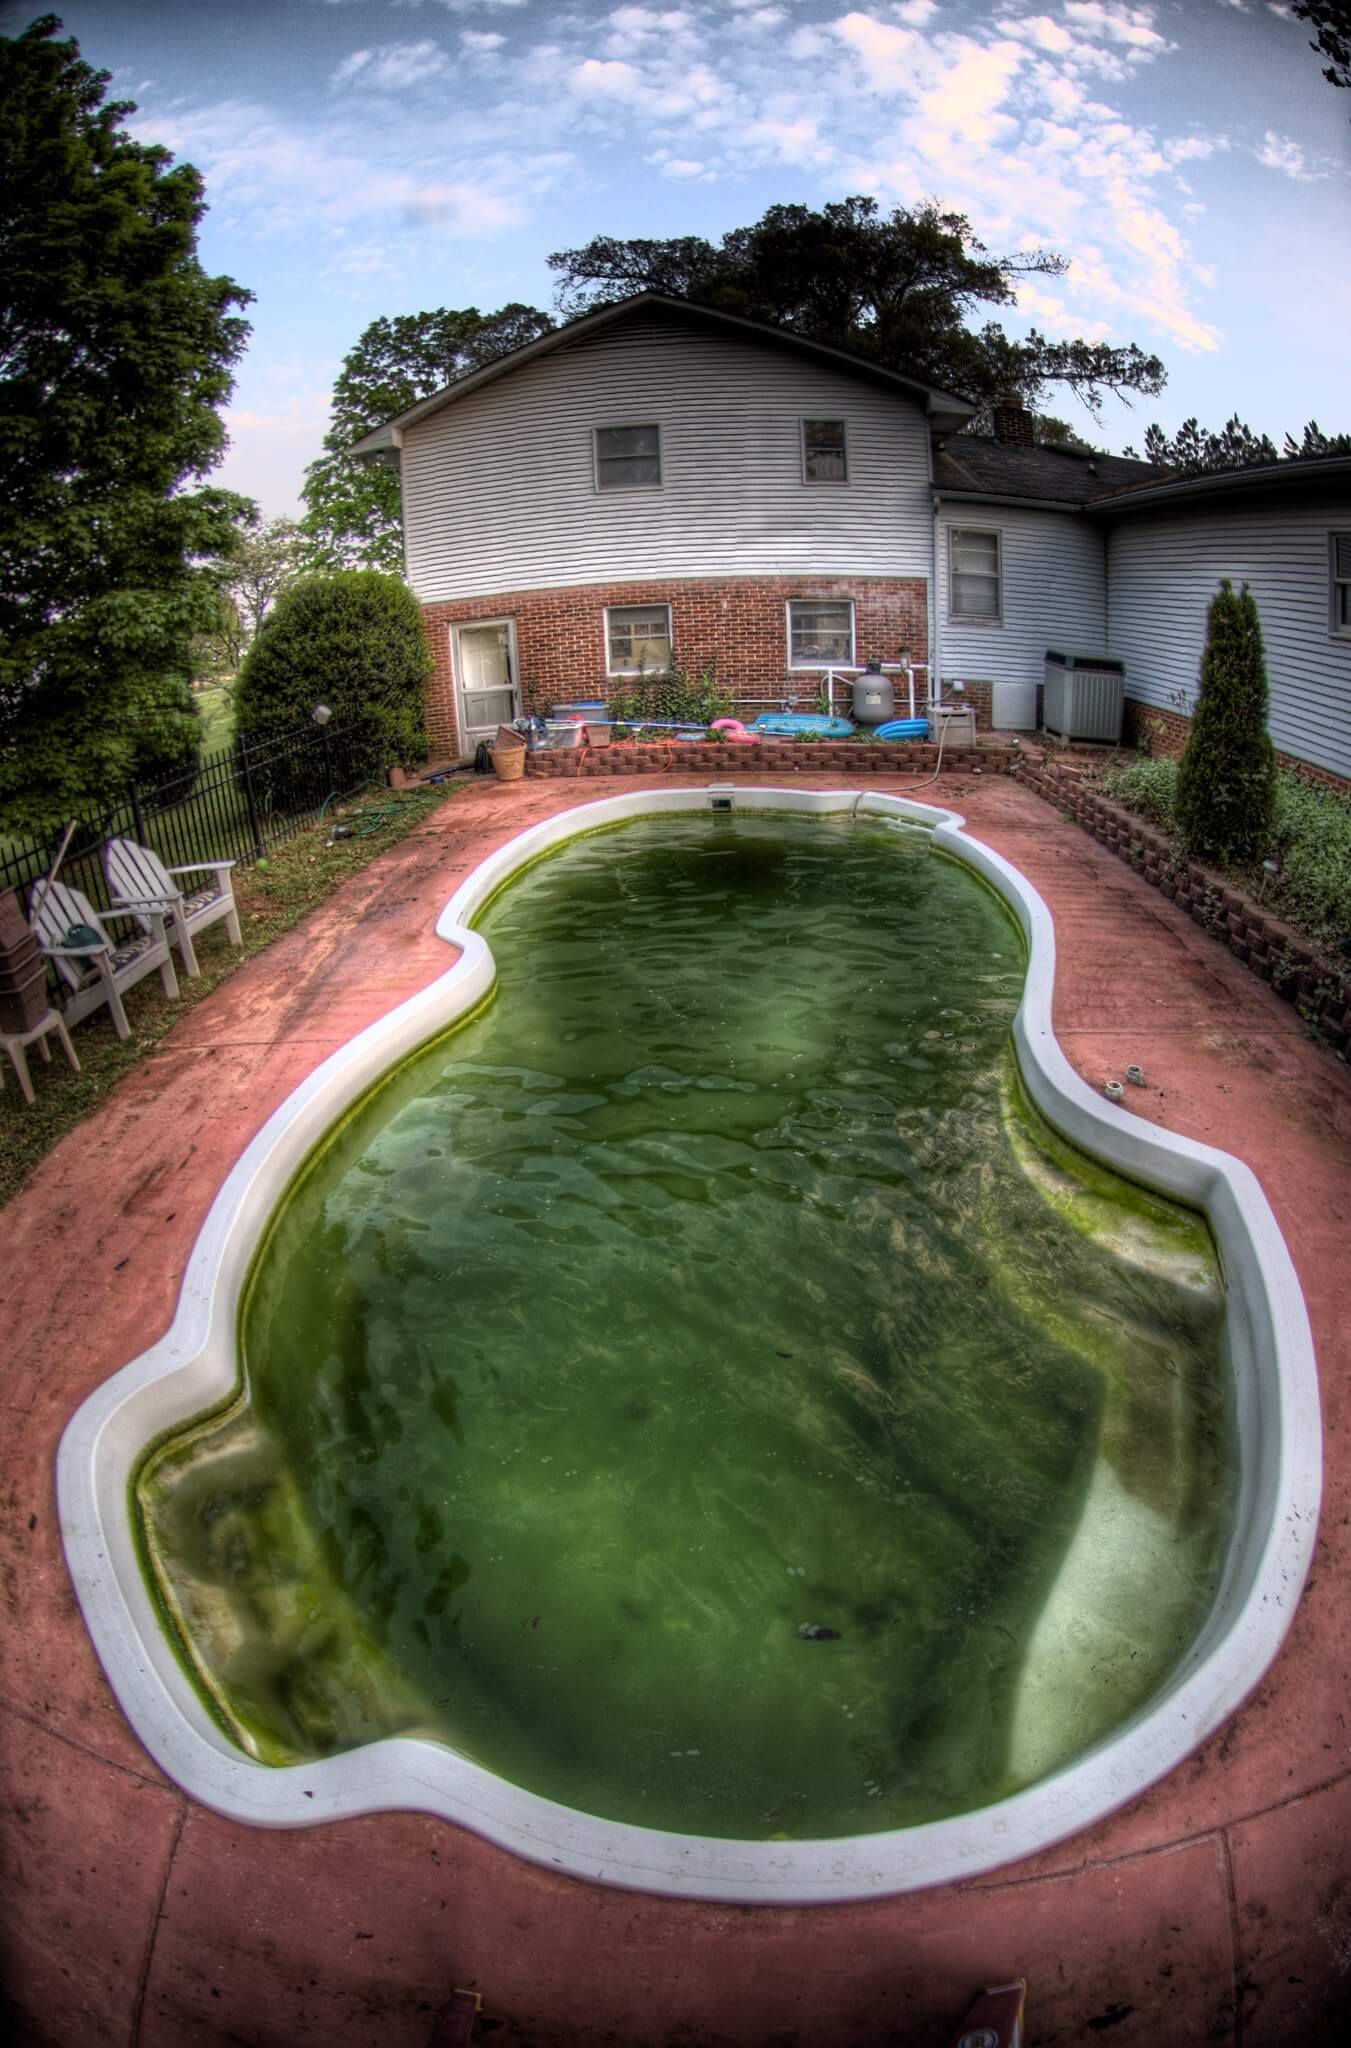 Can You Swim in a Pool with Algae in It